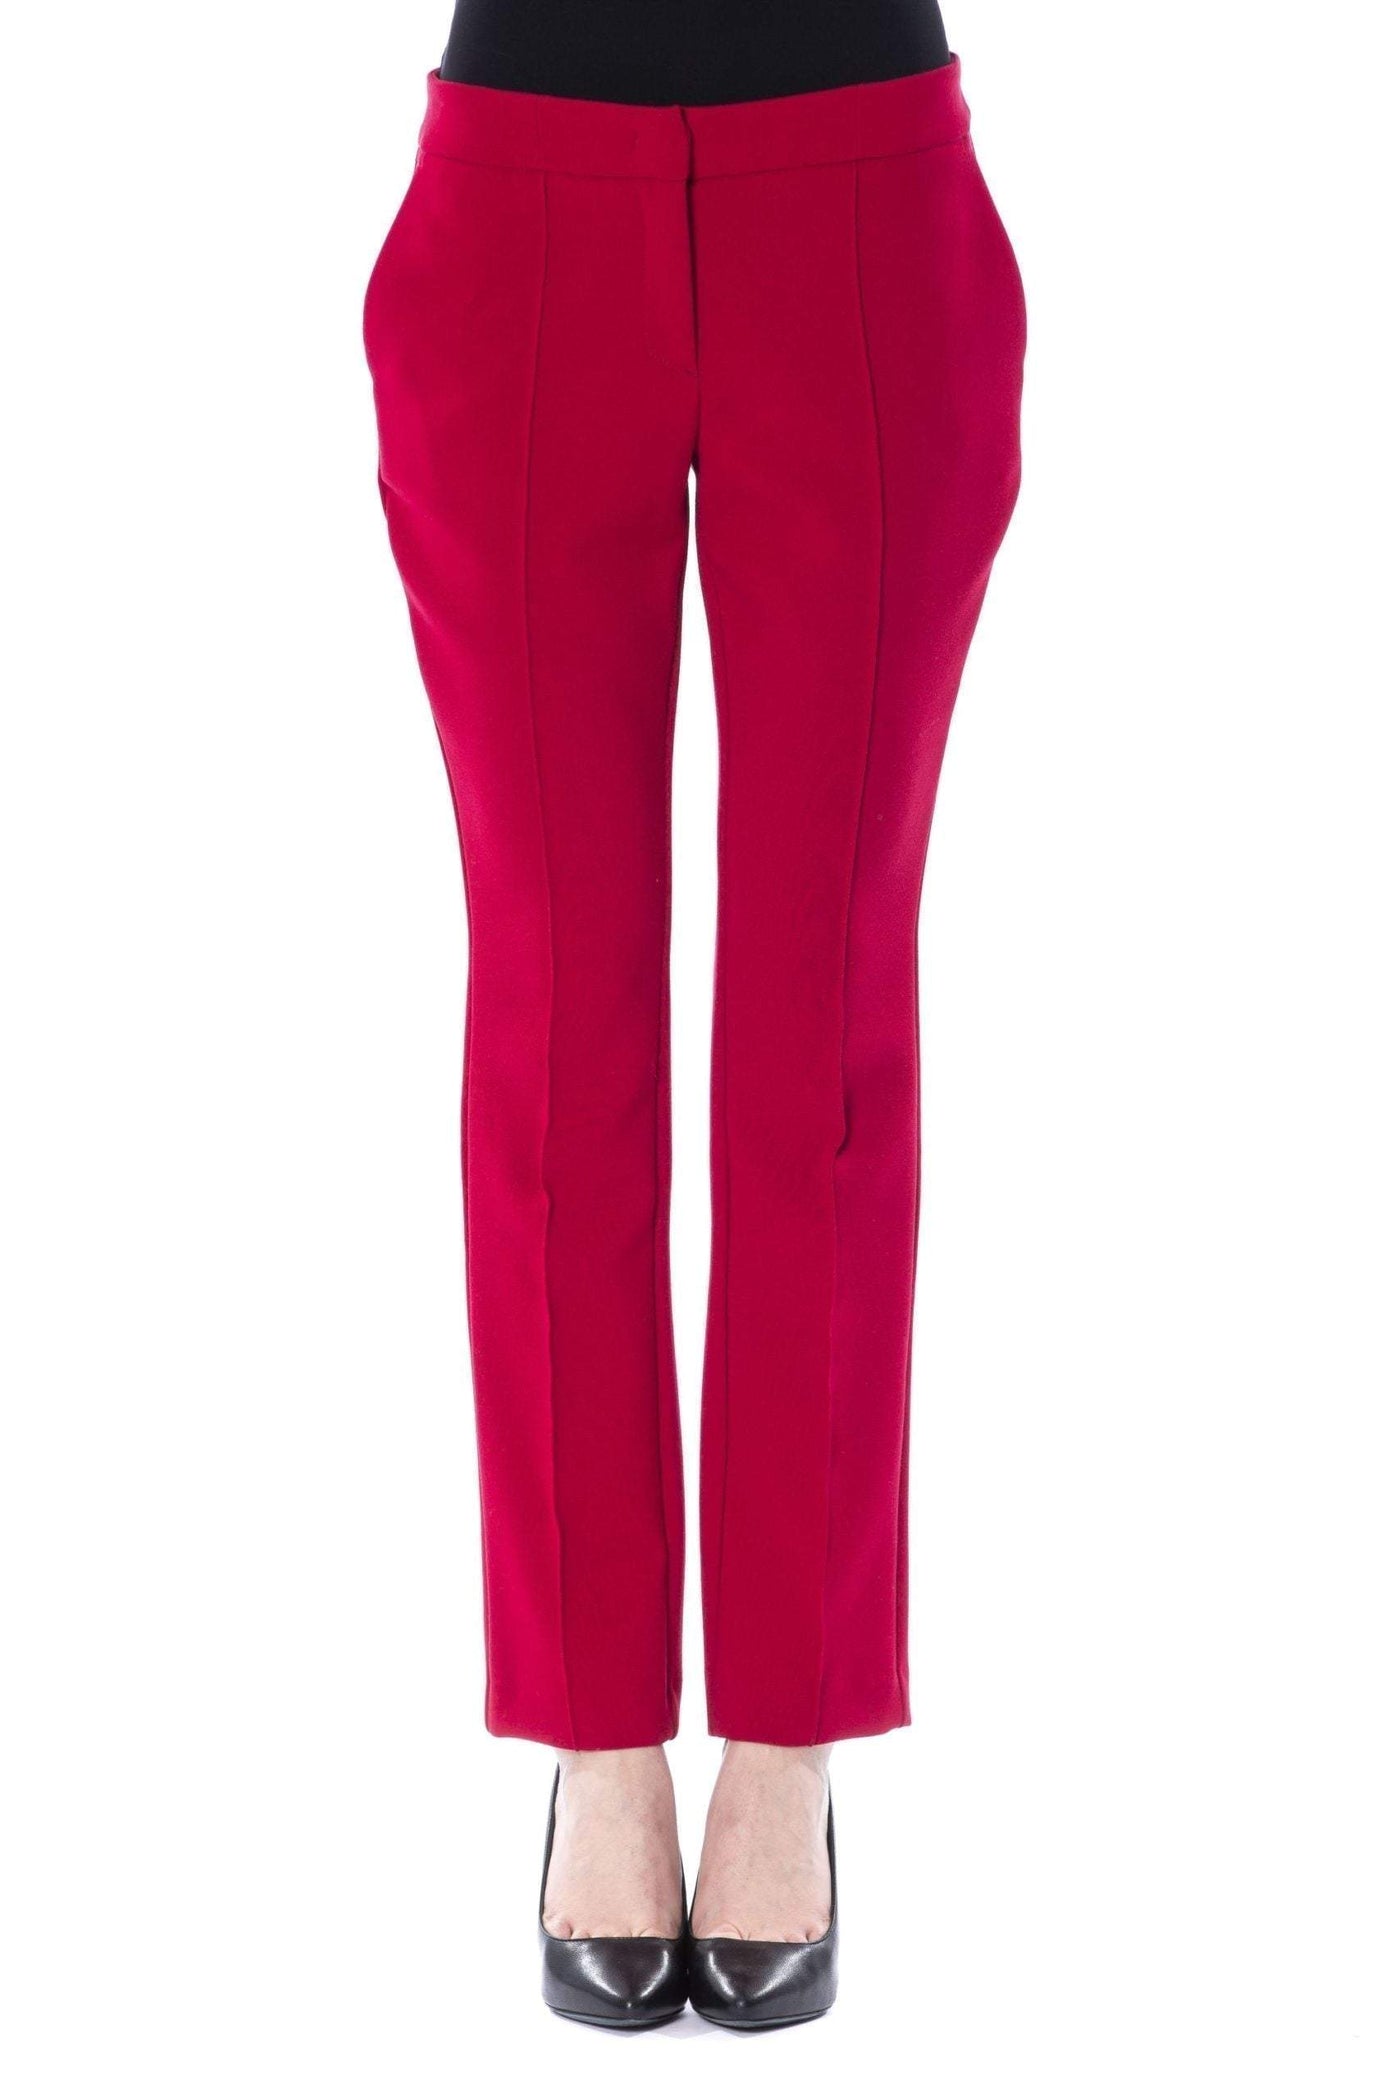 BYBLOS hook closure Jeans & Pant #women, BYBLOS, feed-agegroup-adult, feed-color-Fuchsia, feed-gender-female, Fuchsia, IT42 | S, IT44 | M, IT46 | L, Jeans & Pants - Women - Clothing at SEYMAYKA